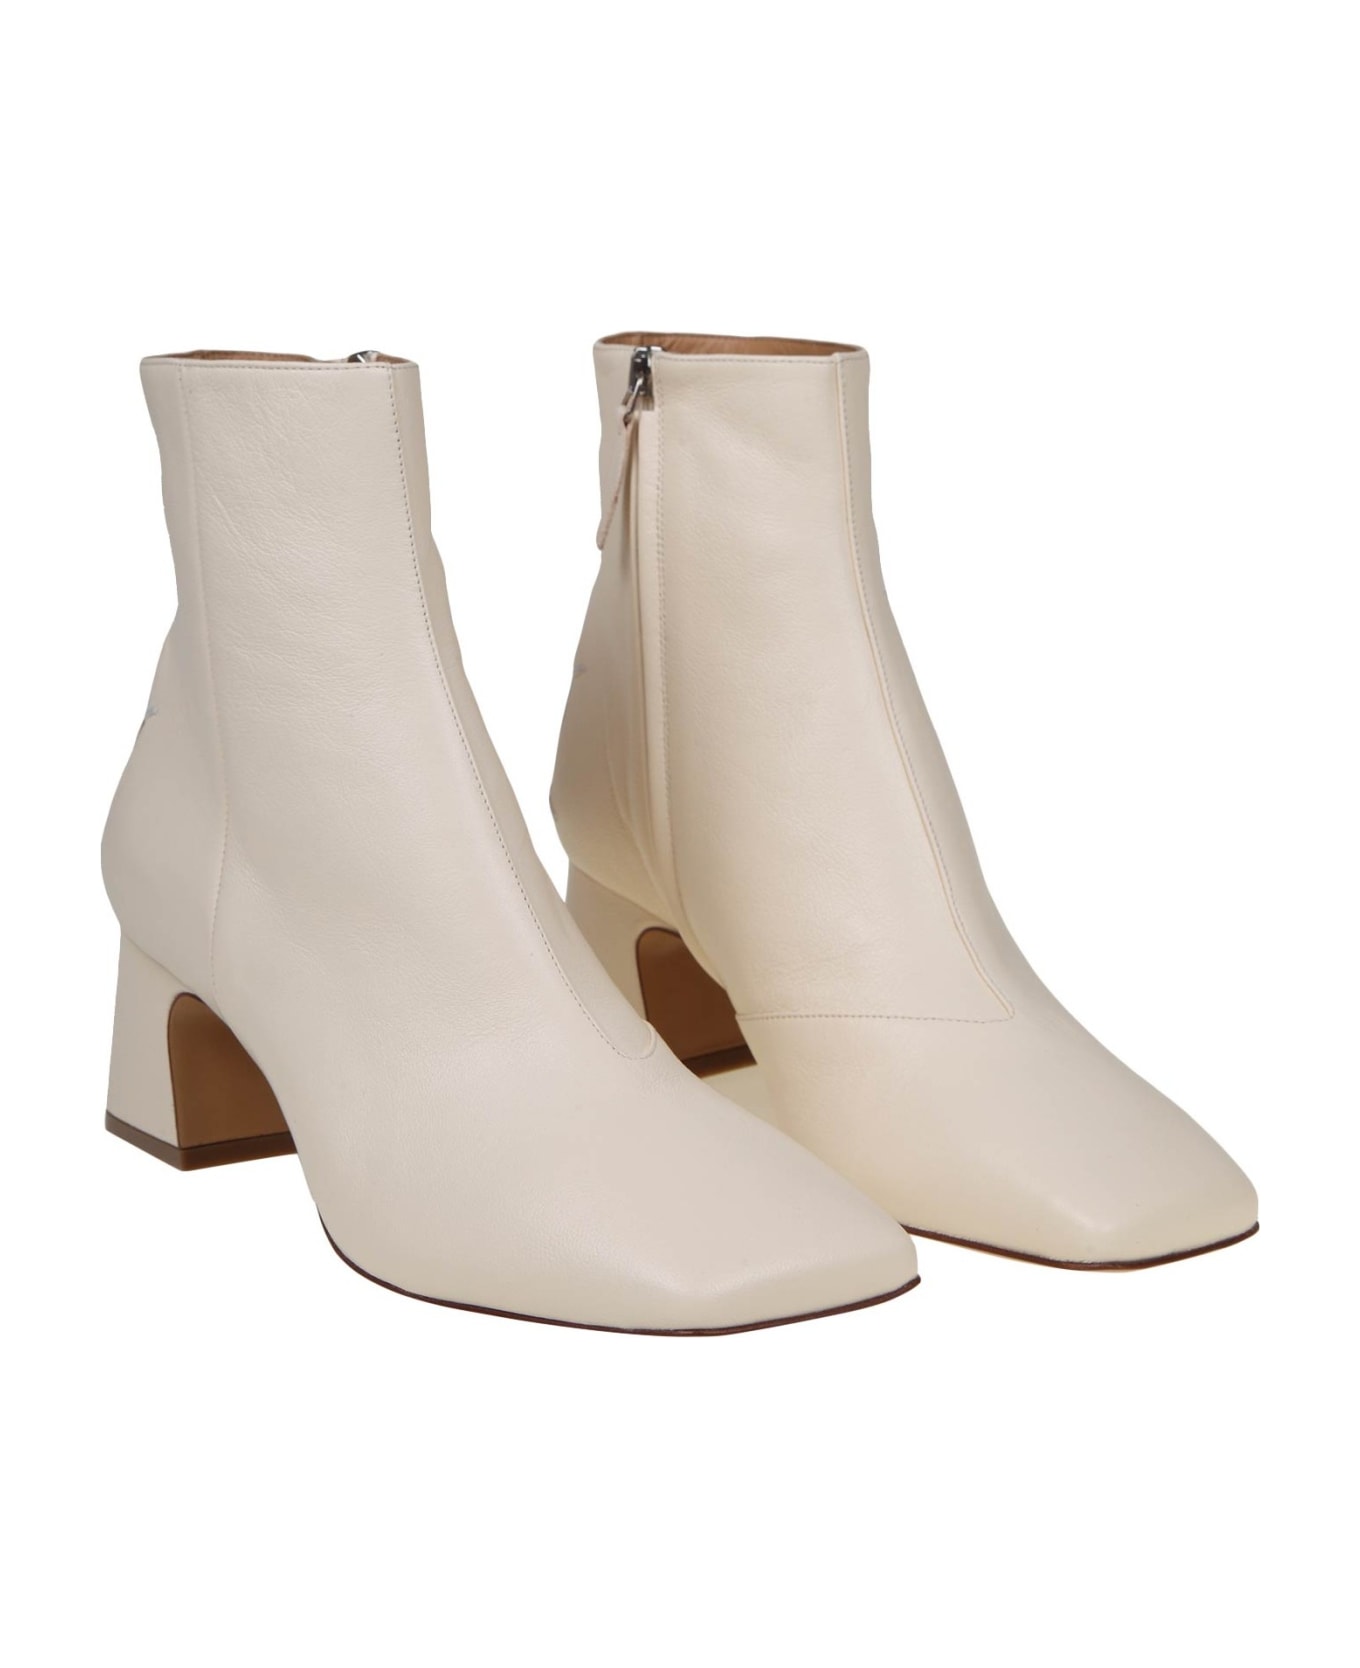 Maison Margiela Ankle Boot Four Stitches In Cream Color Leather - CREAM